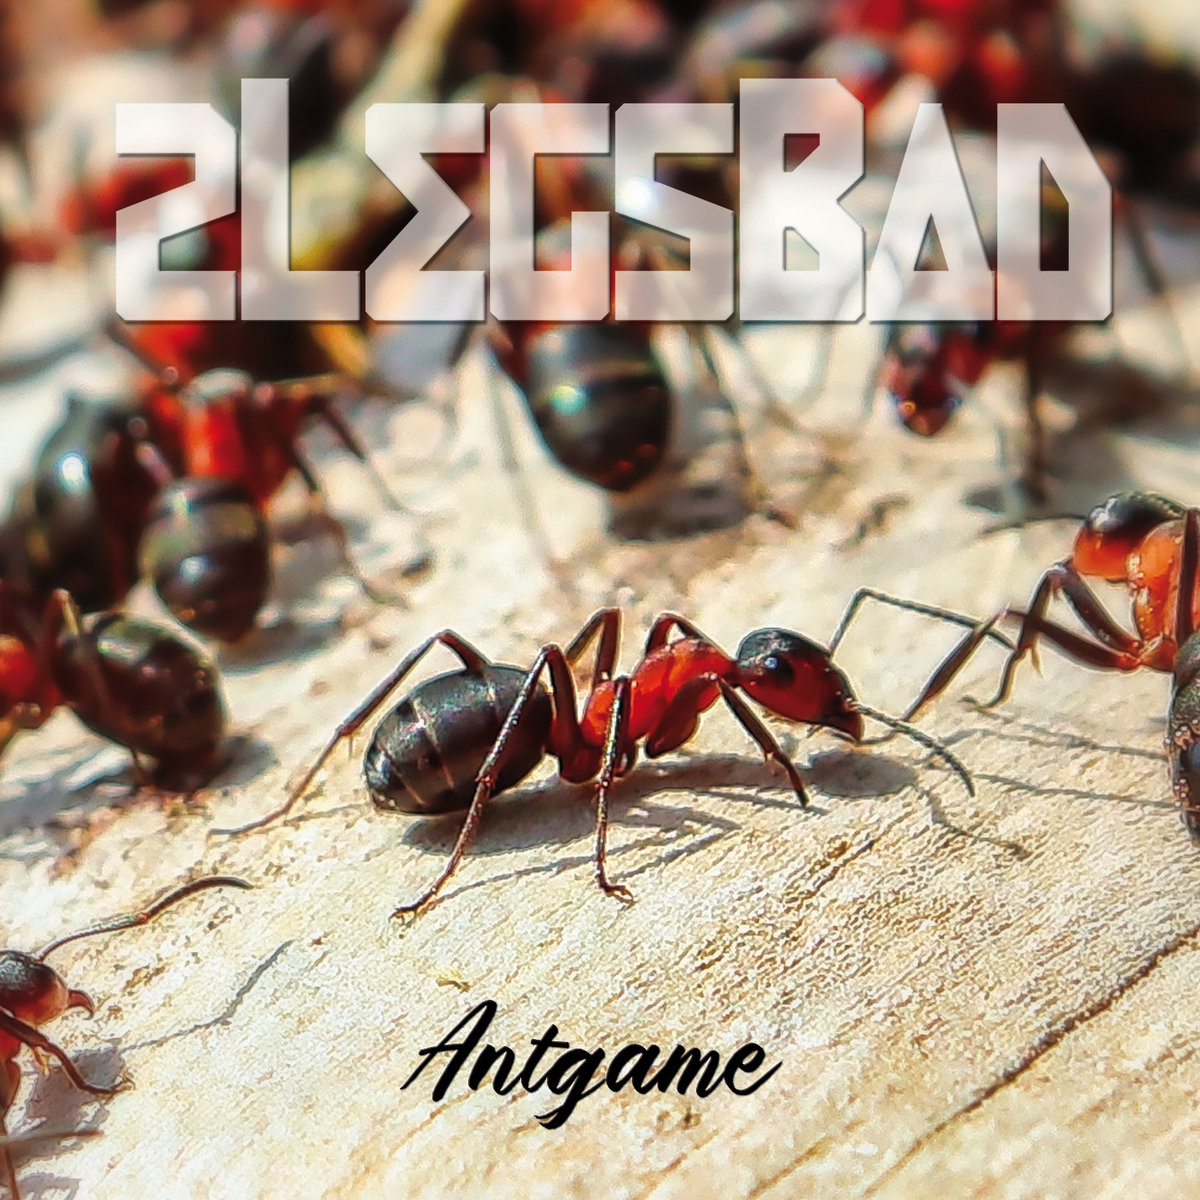 You are currently viewing 2LEGSBAD – Antgame